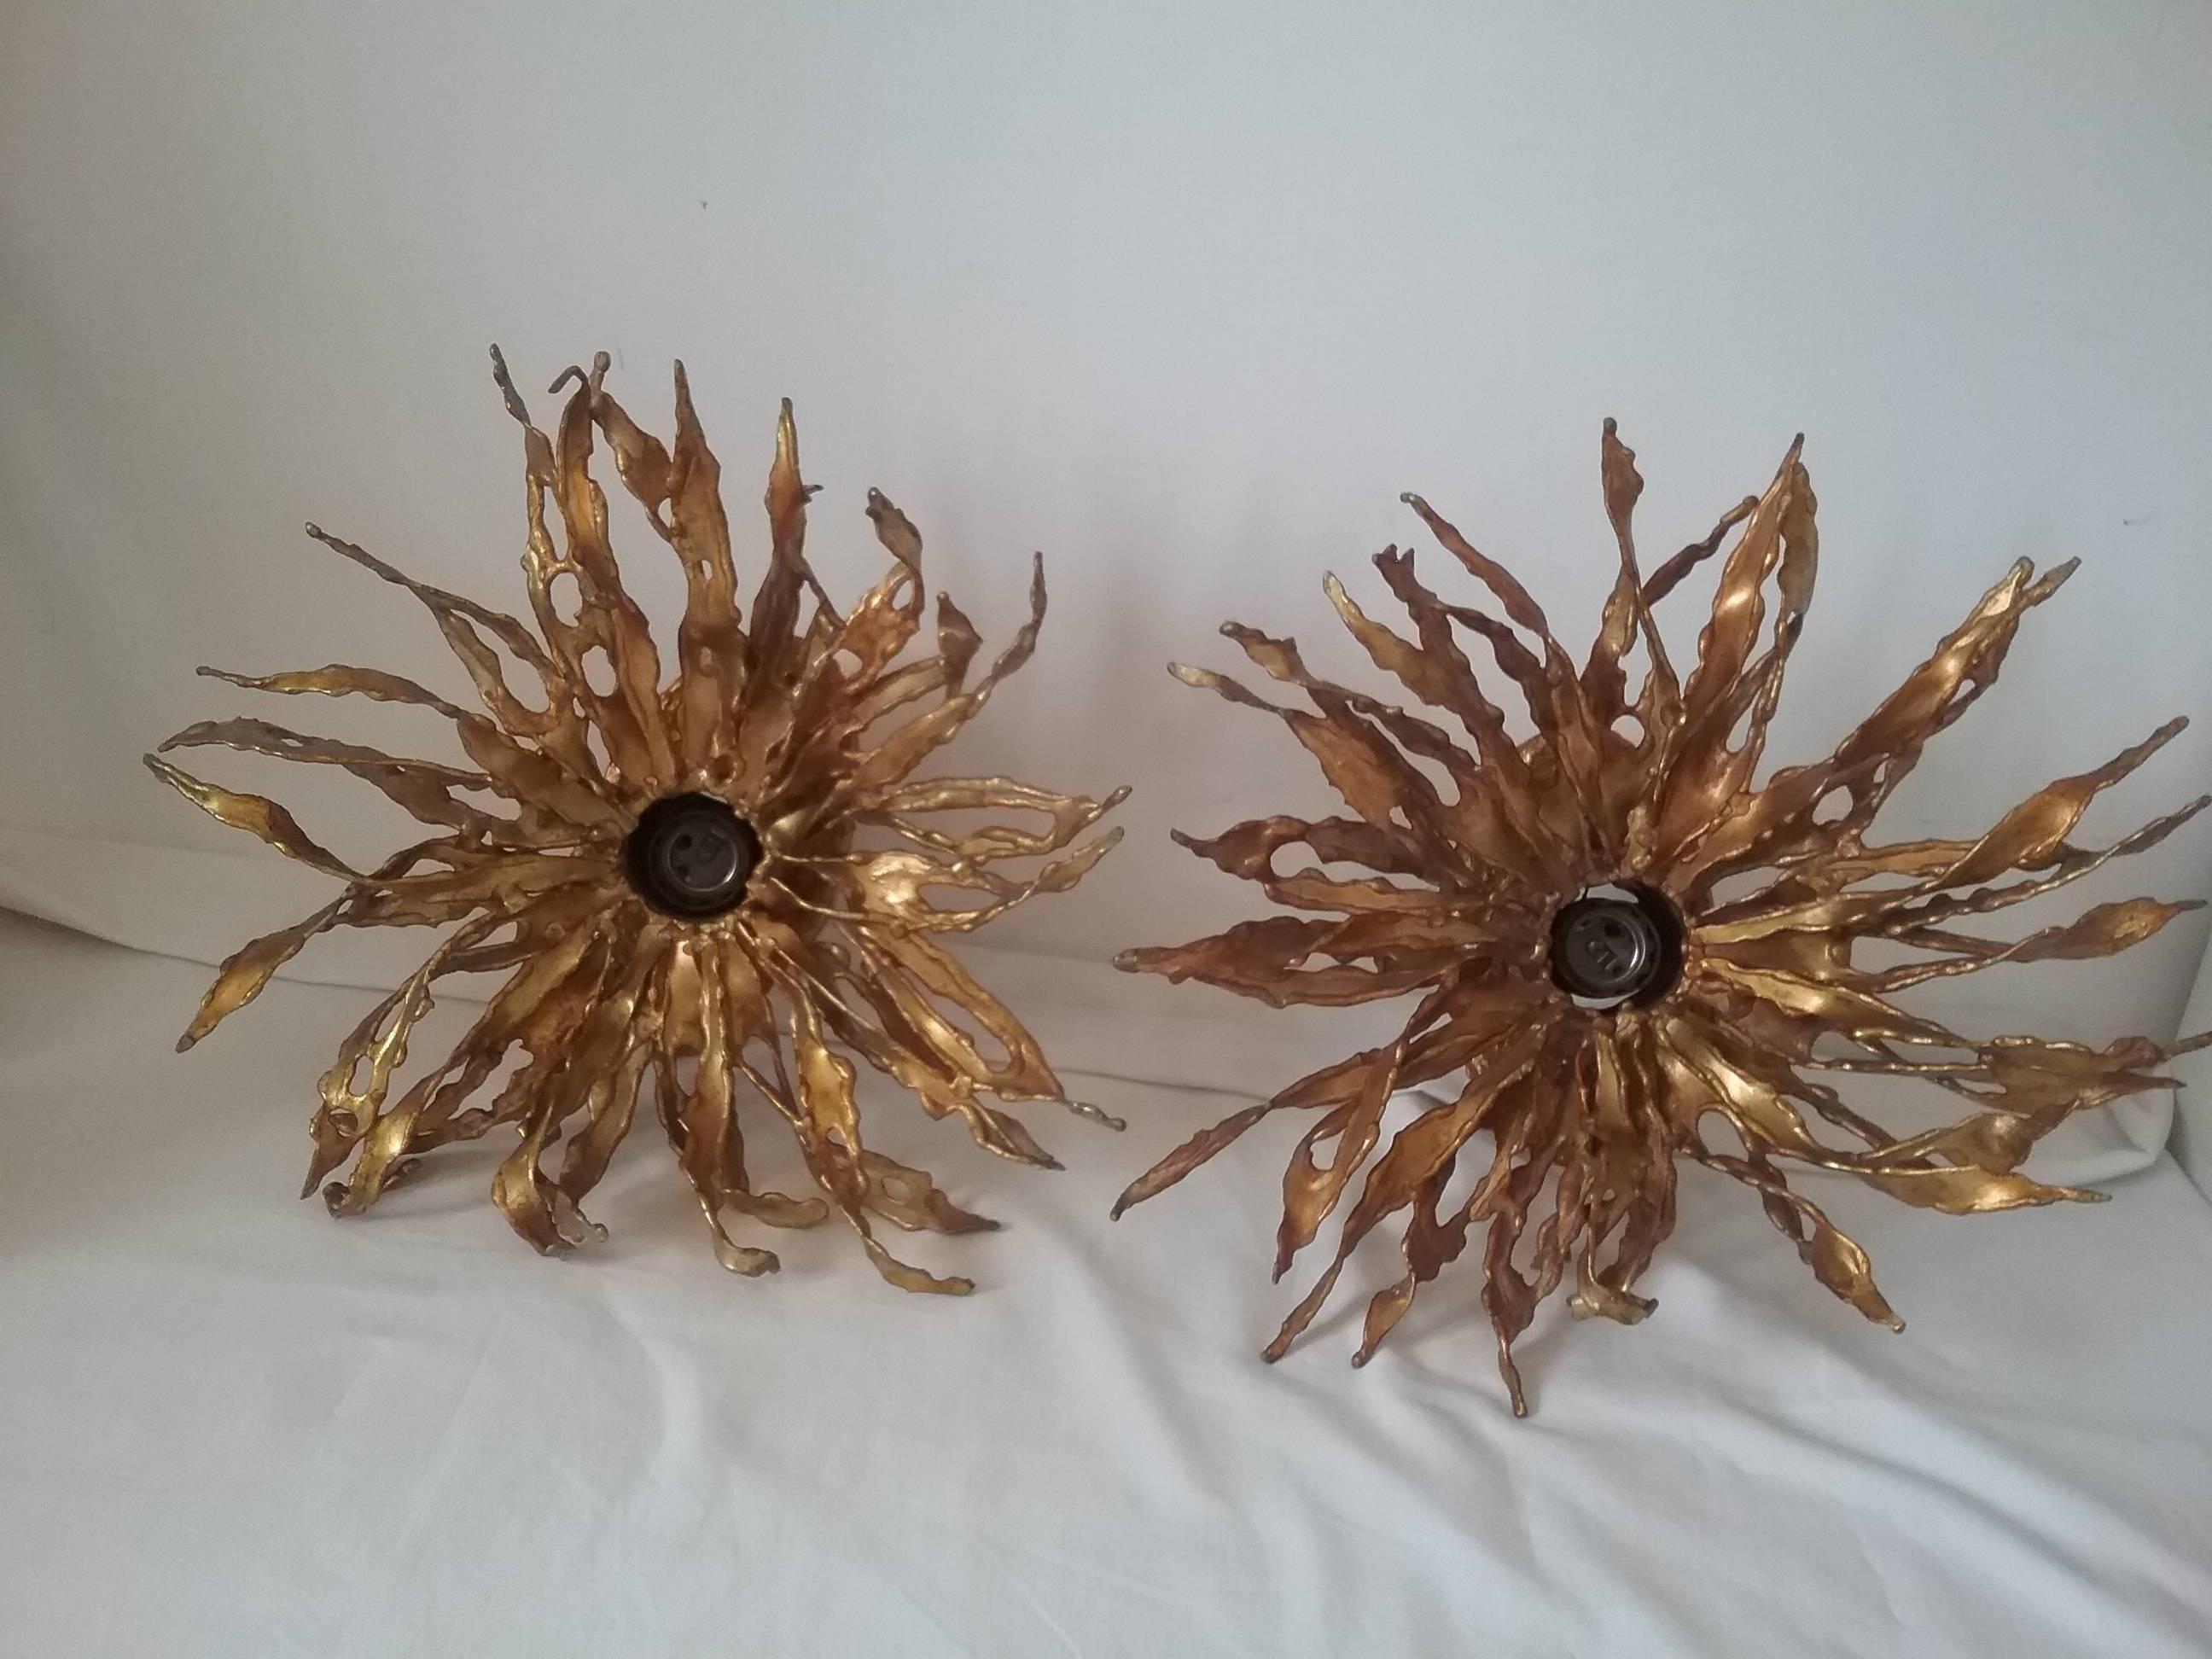 Superb wall lighting in the stylized sun shape, signed on the base.
Paul Moerenhout is a famous sculptor in Belgium, workshop at Bruxelles.
Two handles possible horizontal or vertical
Beautiful gilt patina.